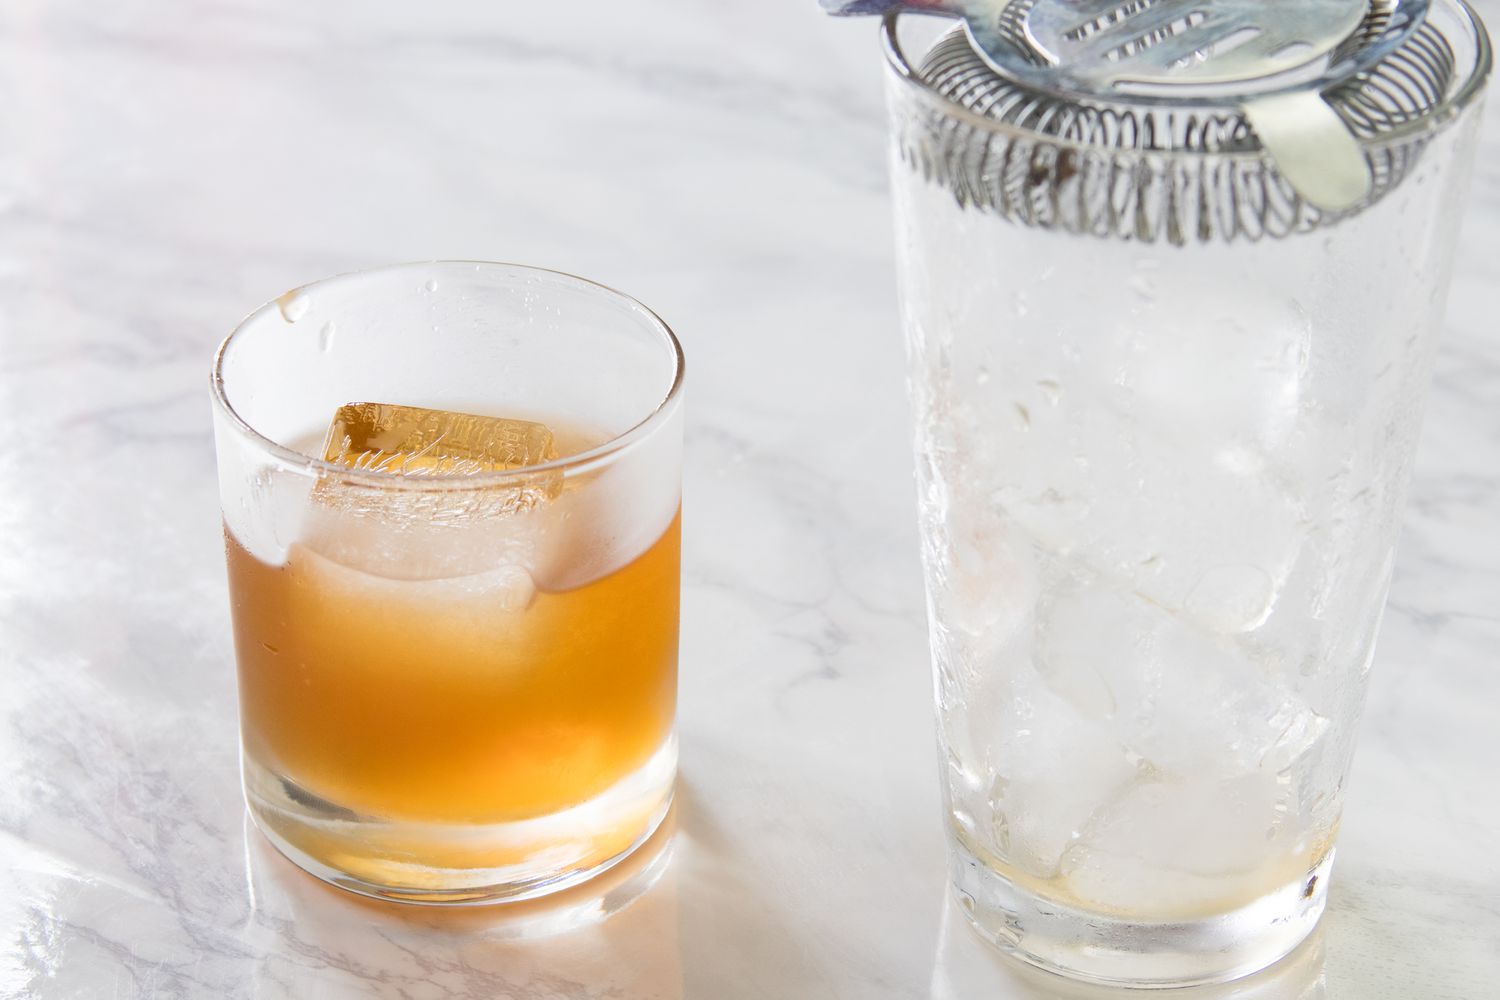 Amaretto sour strained into an old-fashioned glass next to a strainer over a glass with ice